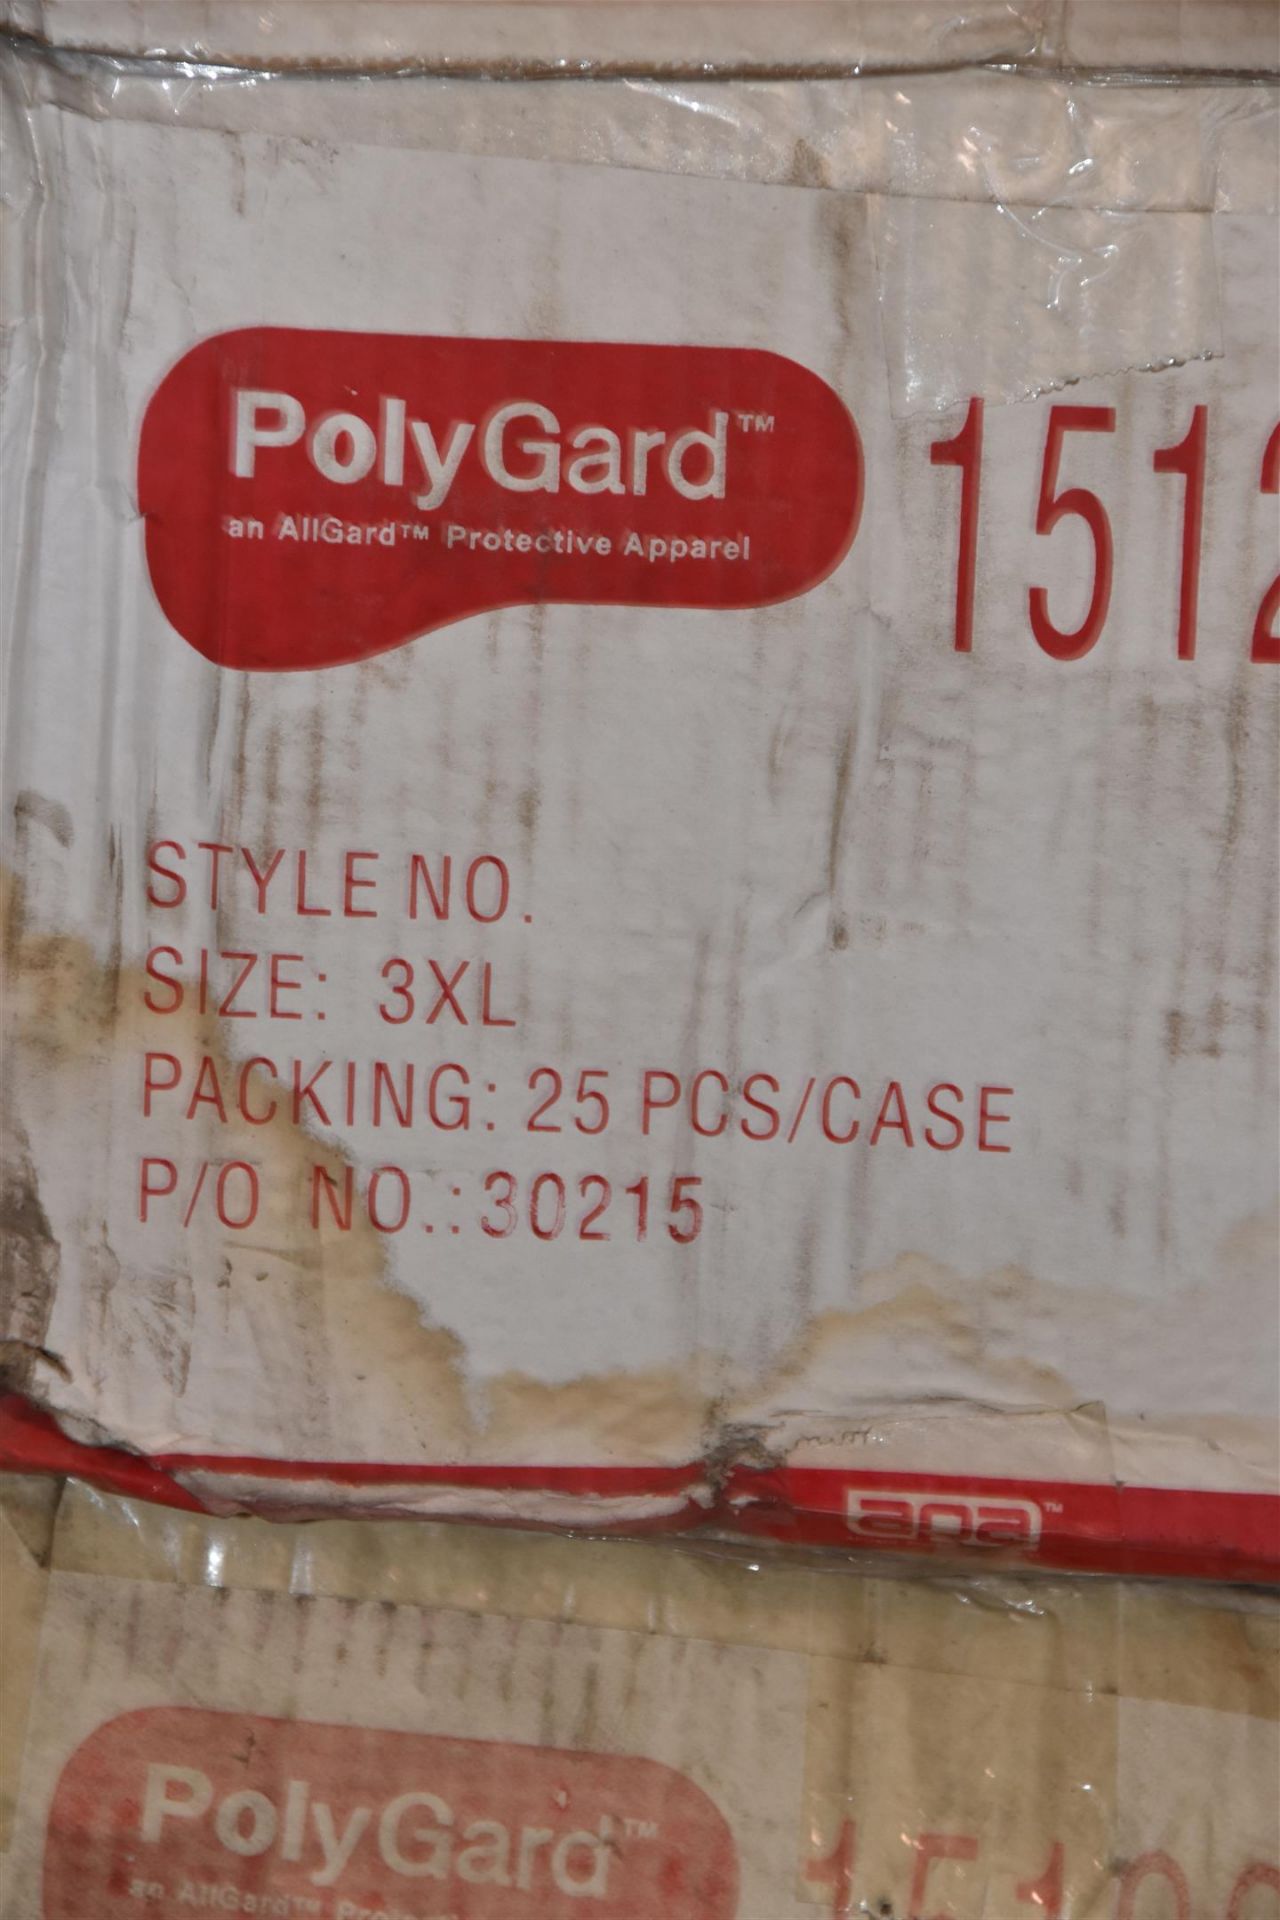 Polyguard Protective Apparel Cases - Image 5 of 9